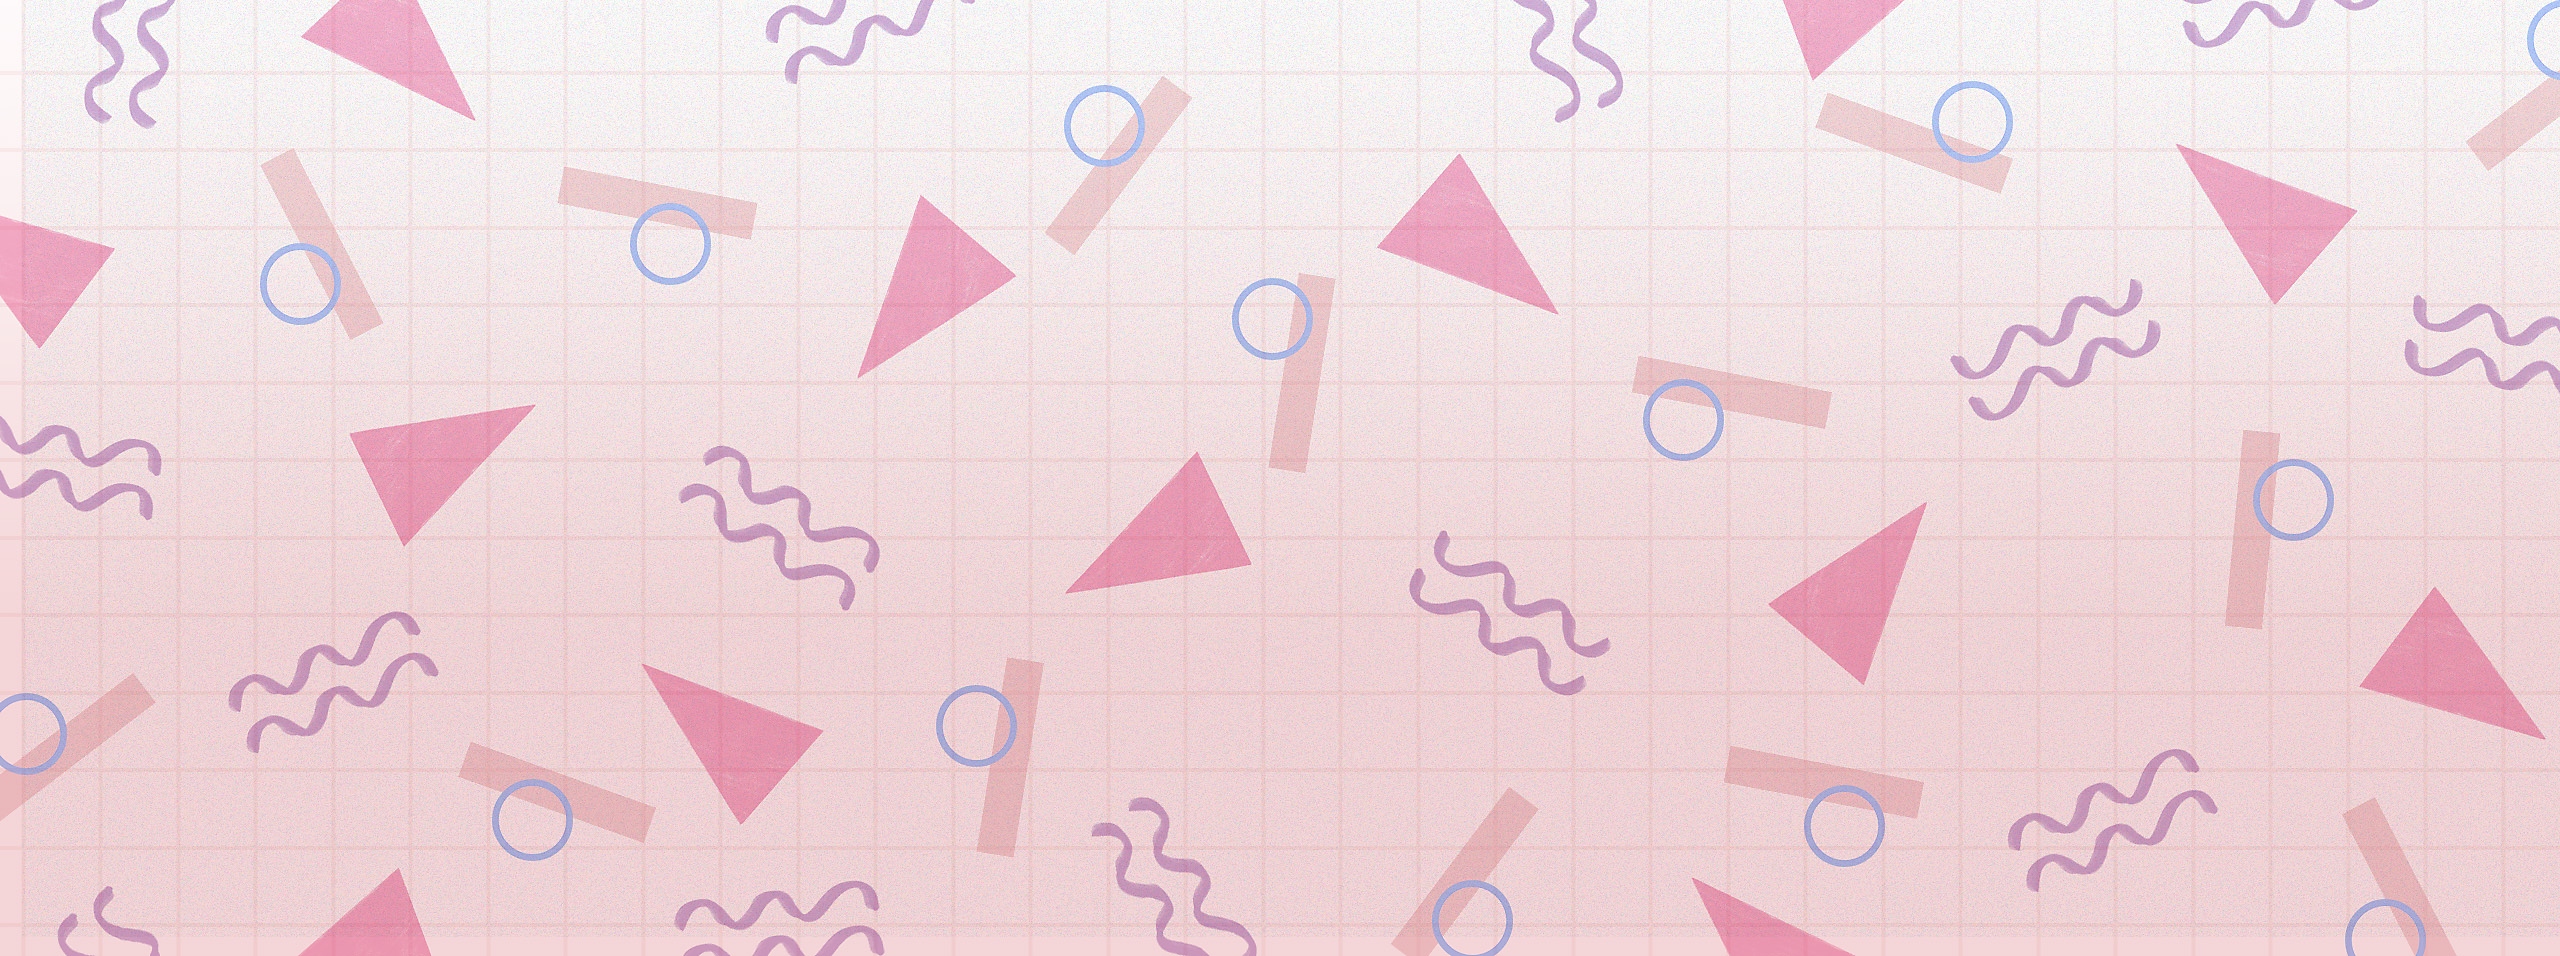 Fitness games pink background